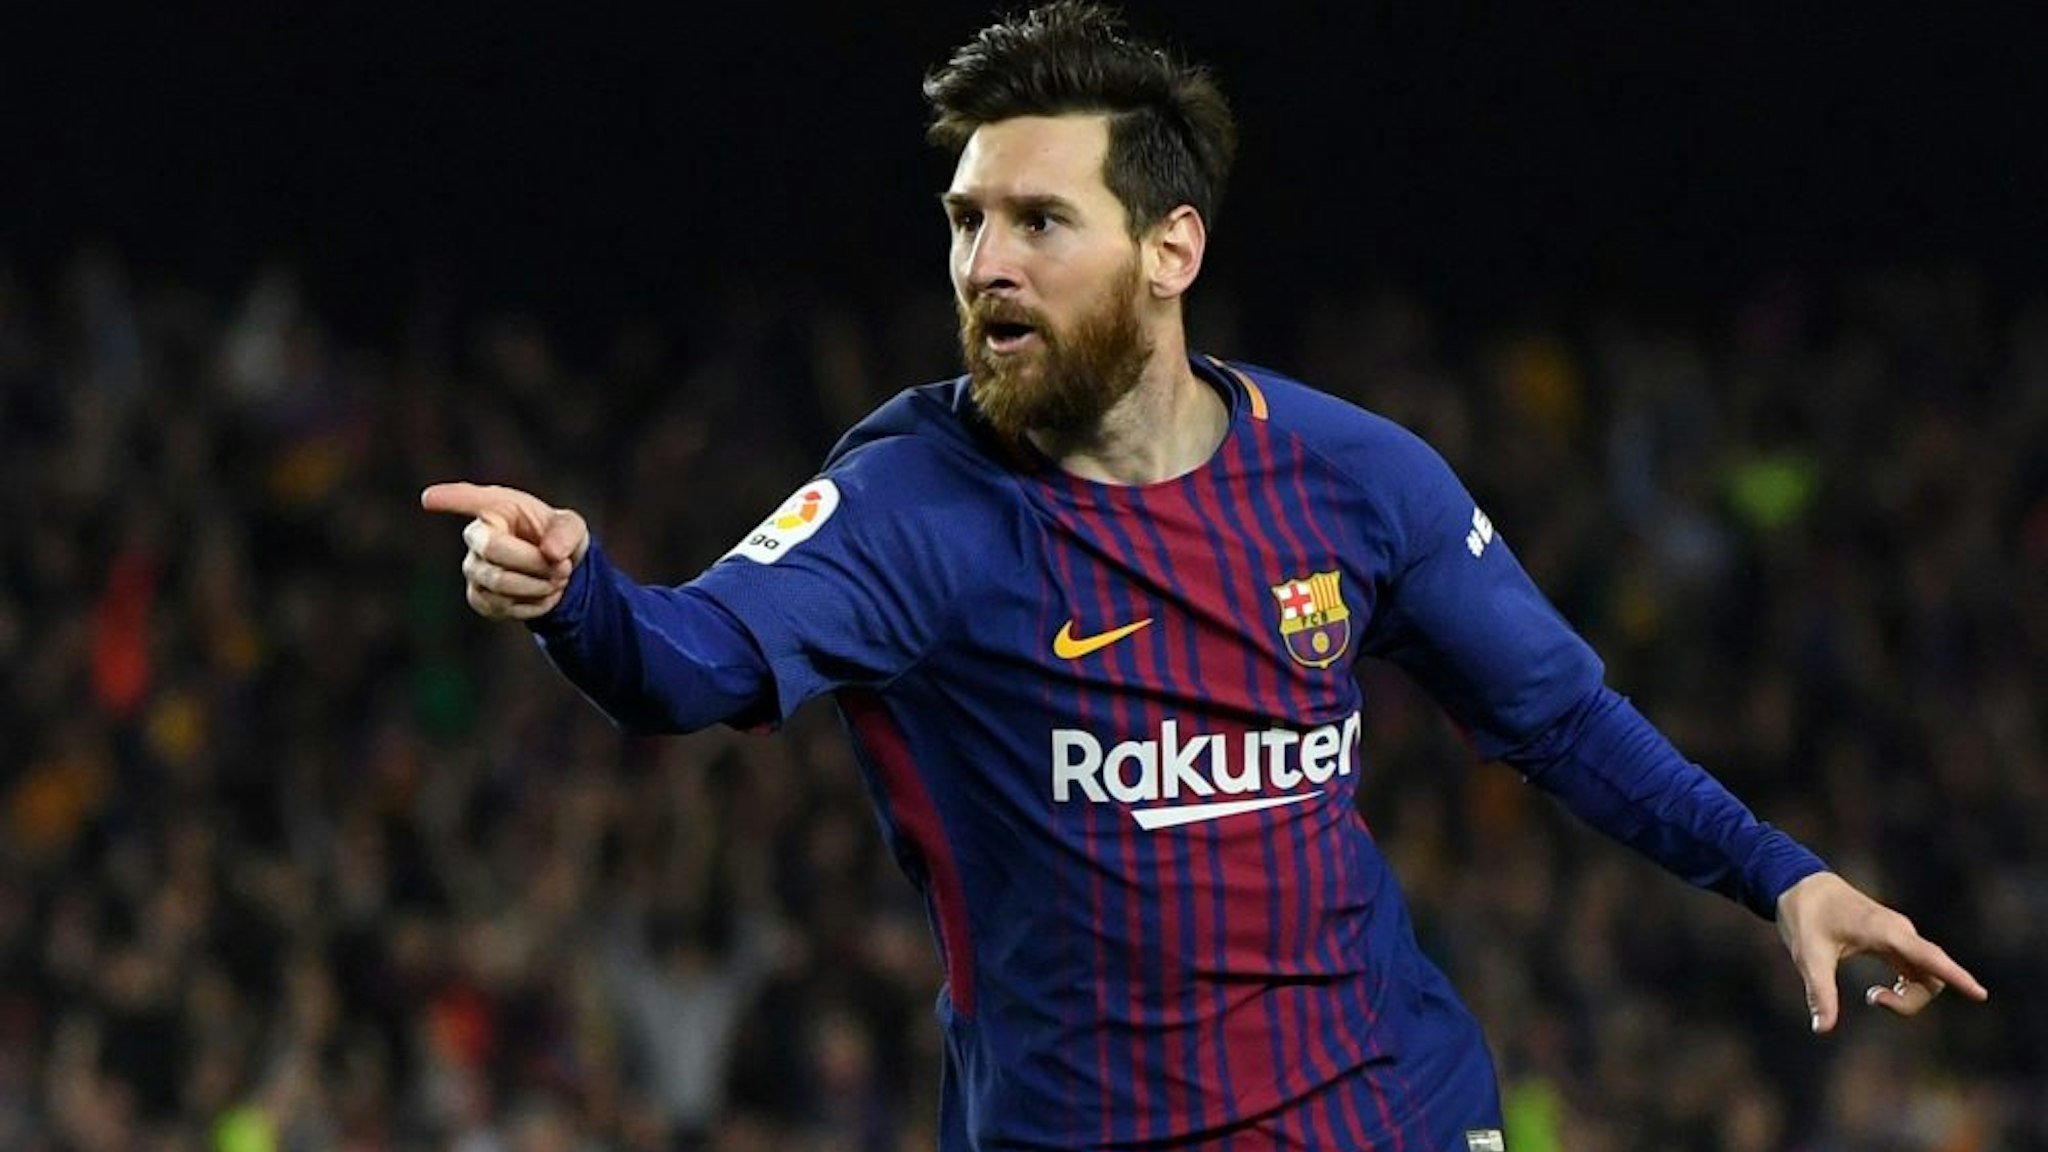 BARCELONA, SPAIN - MAY 06: Lionel Messi of Barcelona celebrates after scoring his sides second goal during the La Liga match between Barcelona and Real Madrid at Camp Nou on May 6, 2018 in Barcelona, Spain.